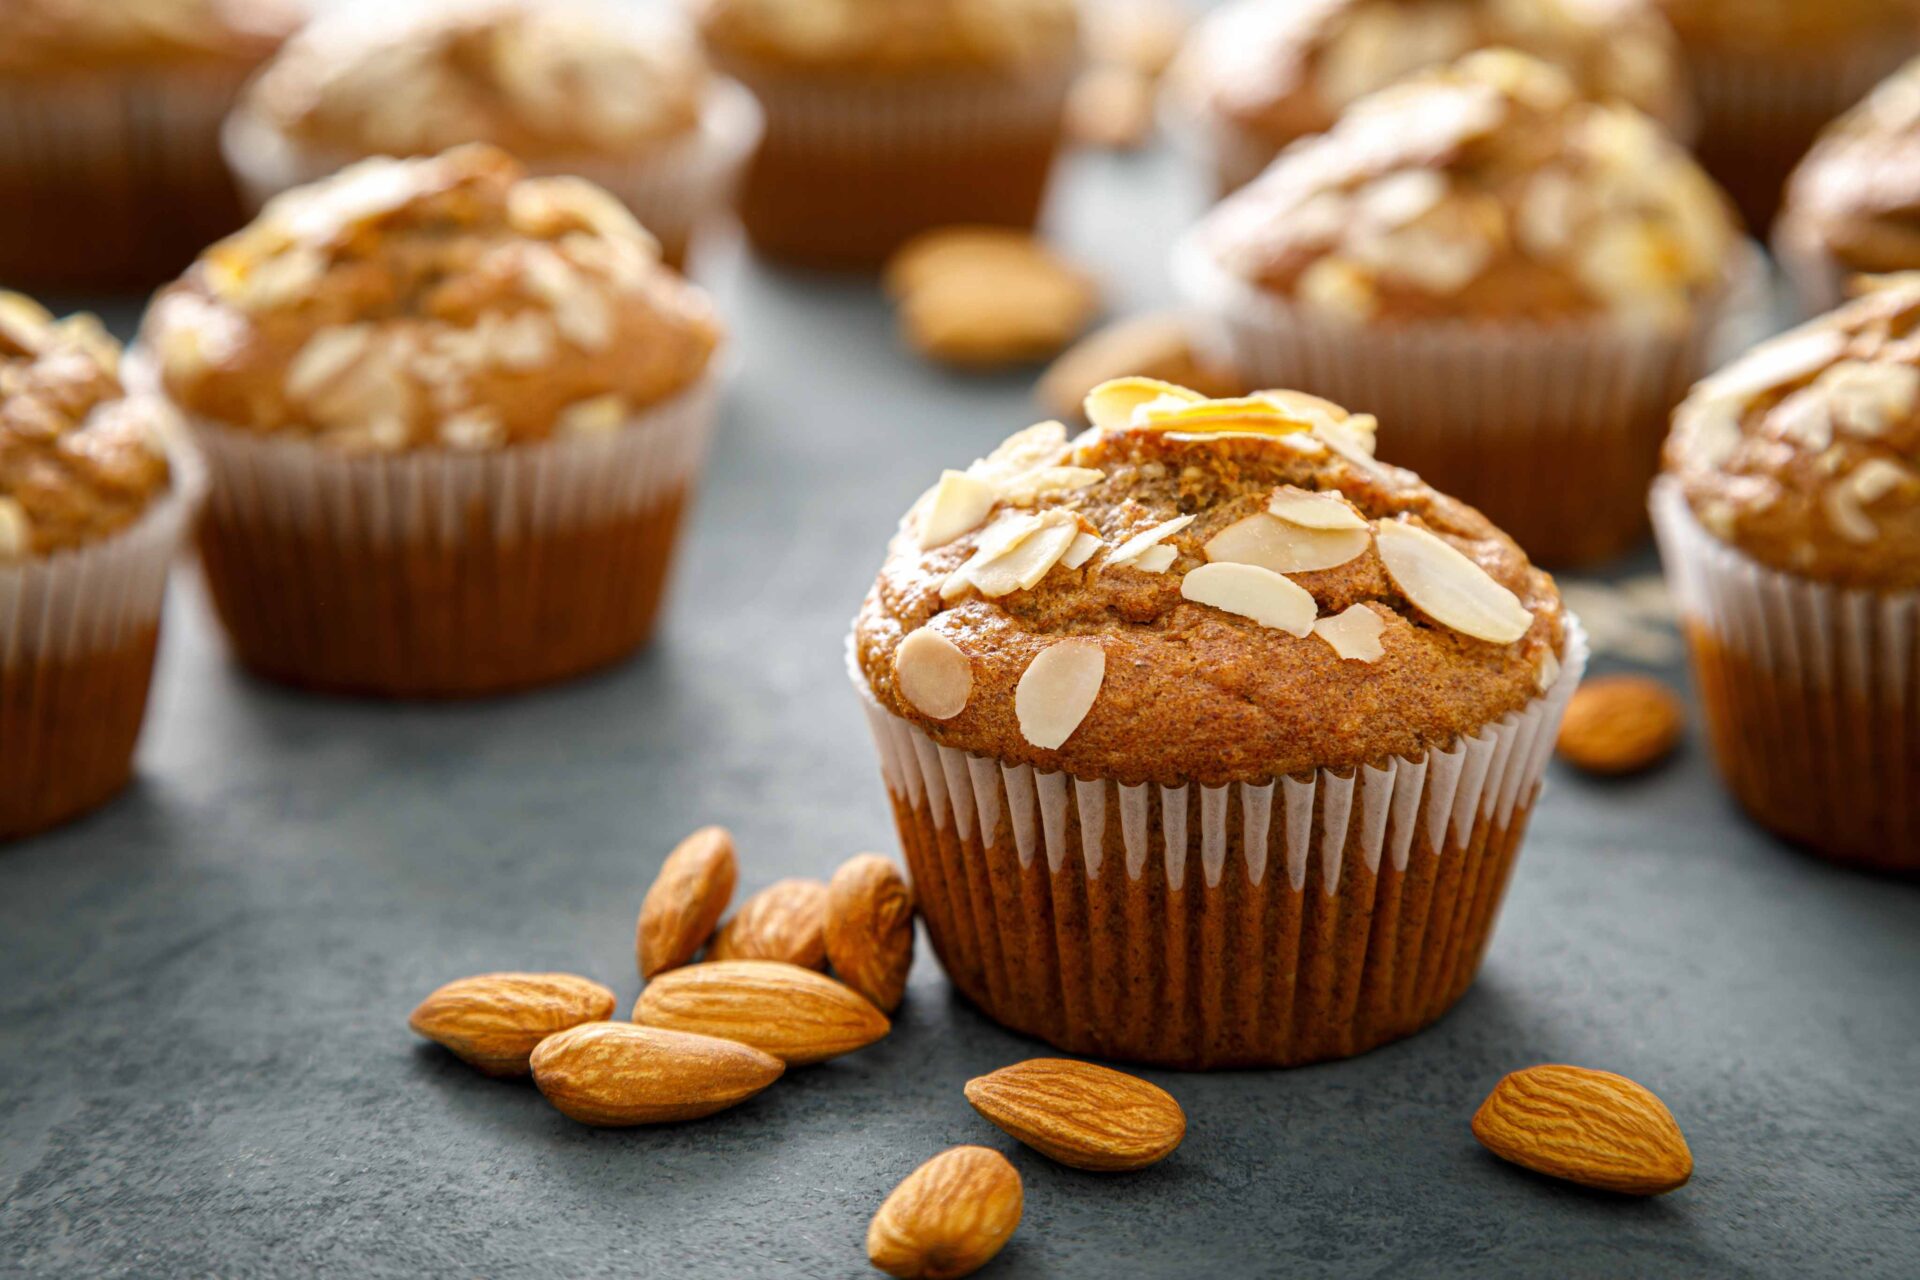 Baked Goods with Sliced Almonds